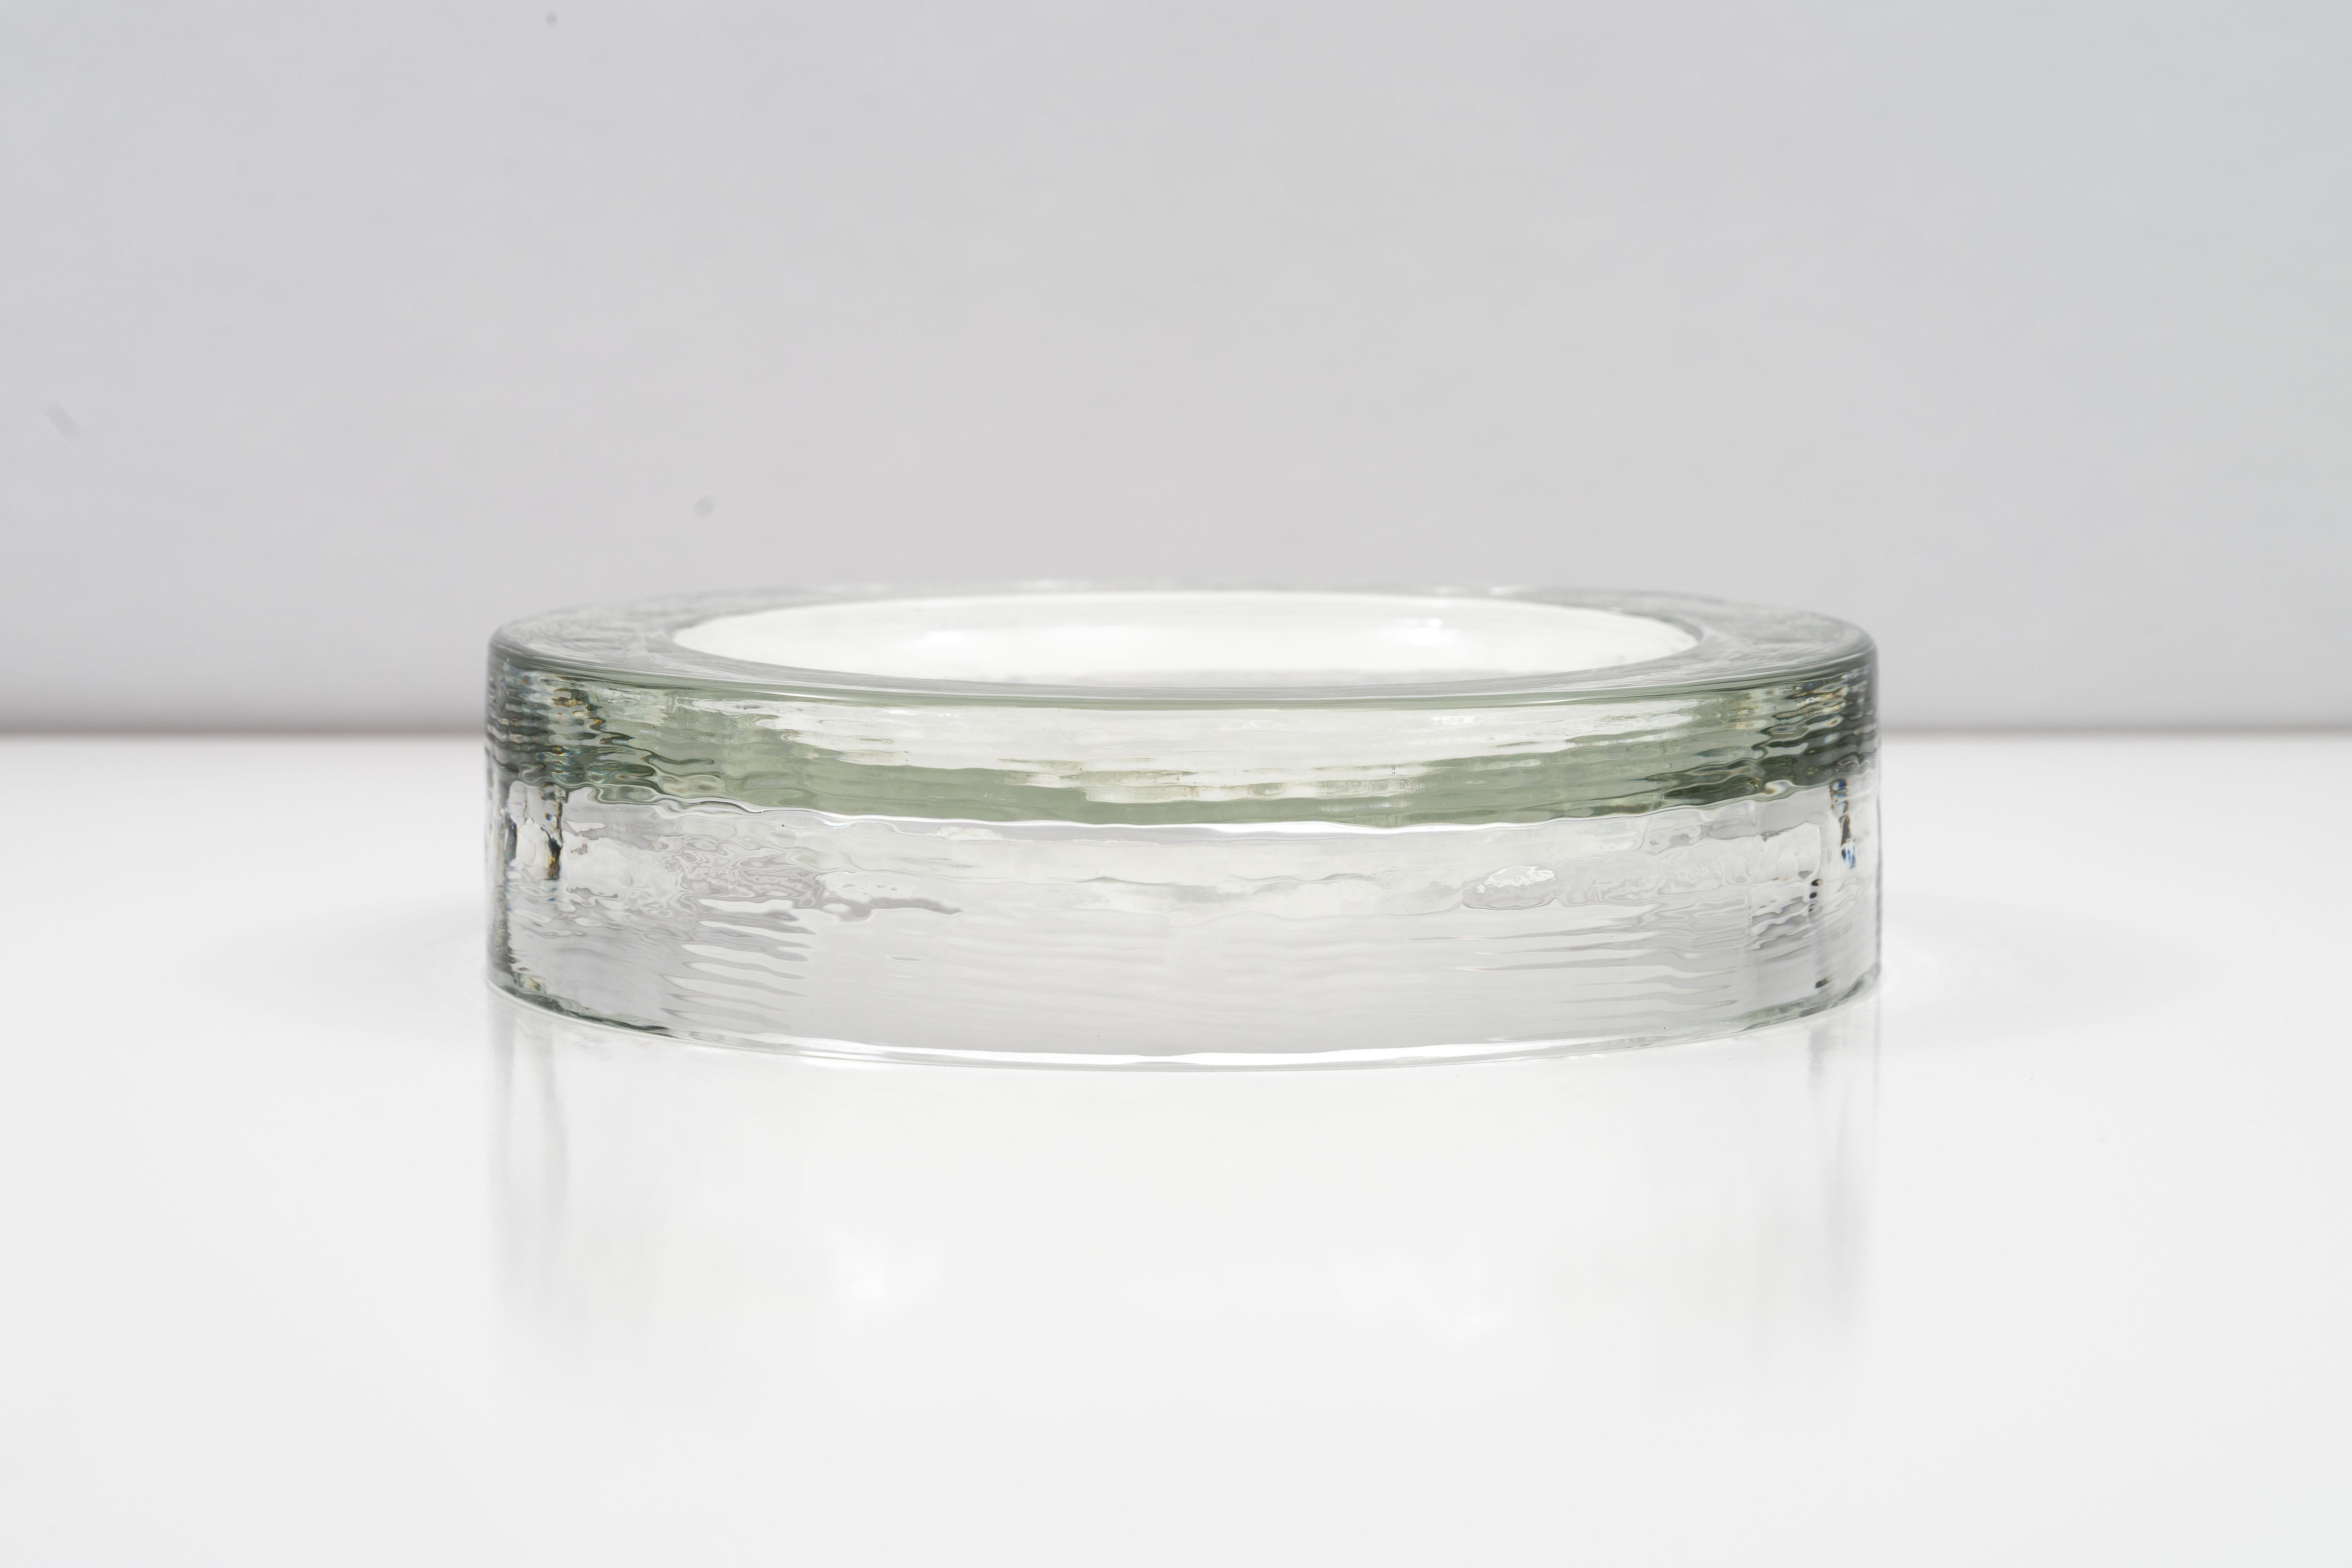 Substantial low textured clear glass dish by Barbini Murano from the 1970s. The cast glass dish is suspended inside thick 1.5cm walls. Beautifully catches the light to create patterns on the surrounding surface. Incised 